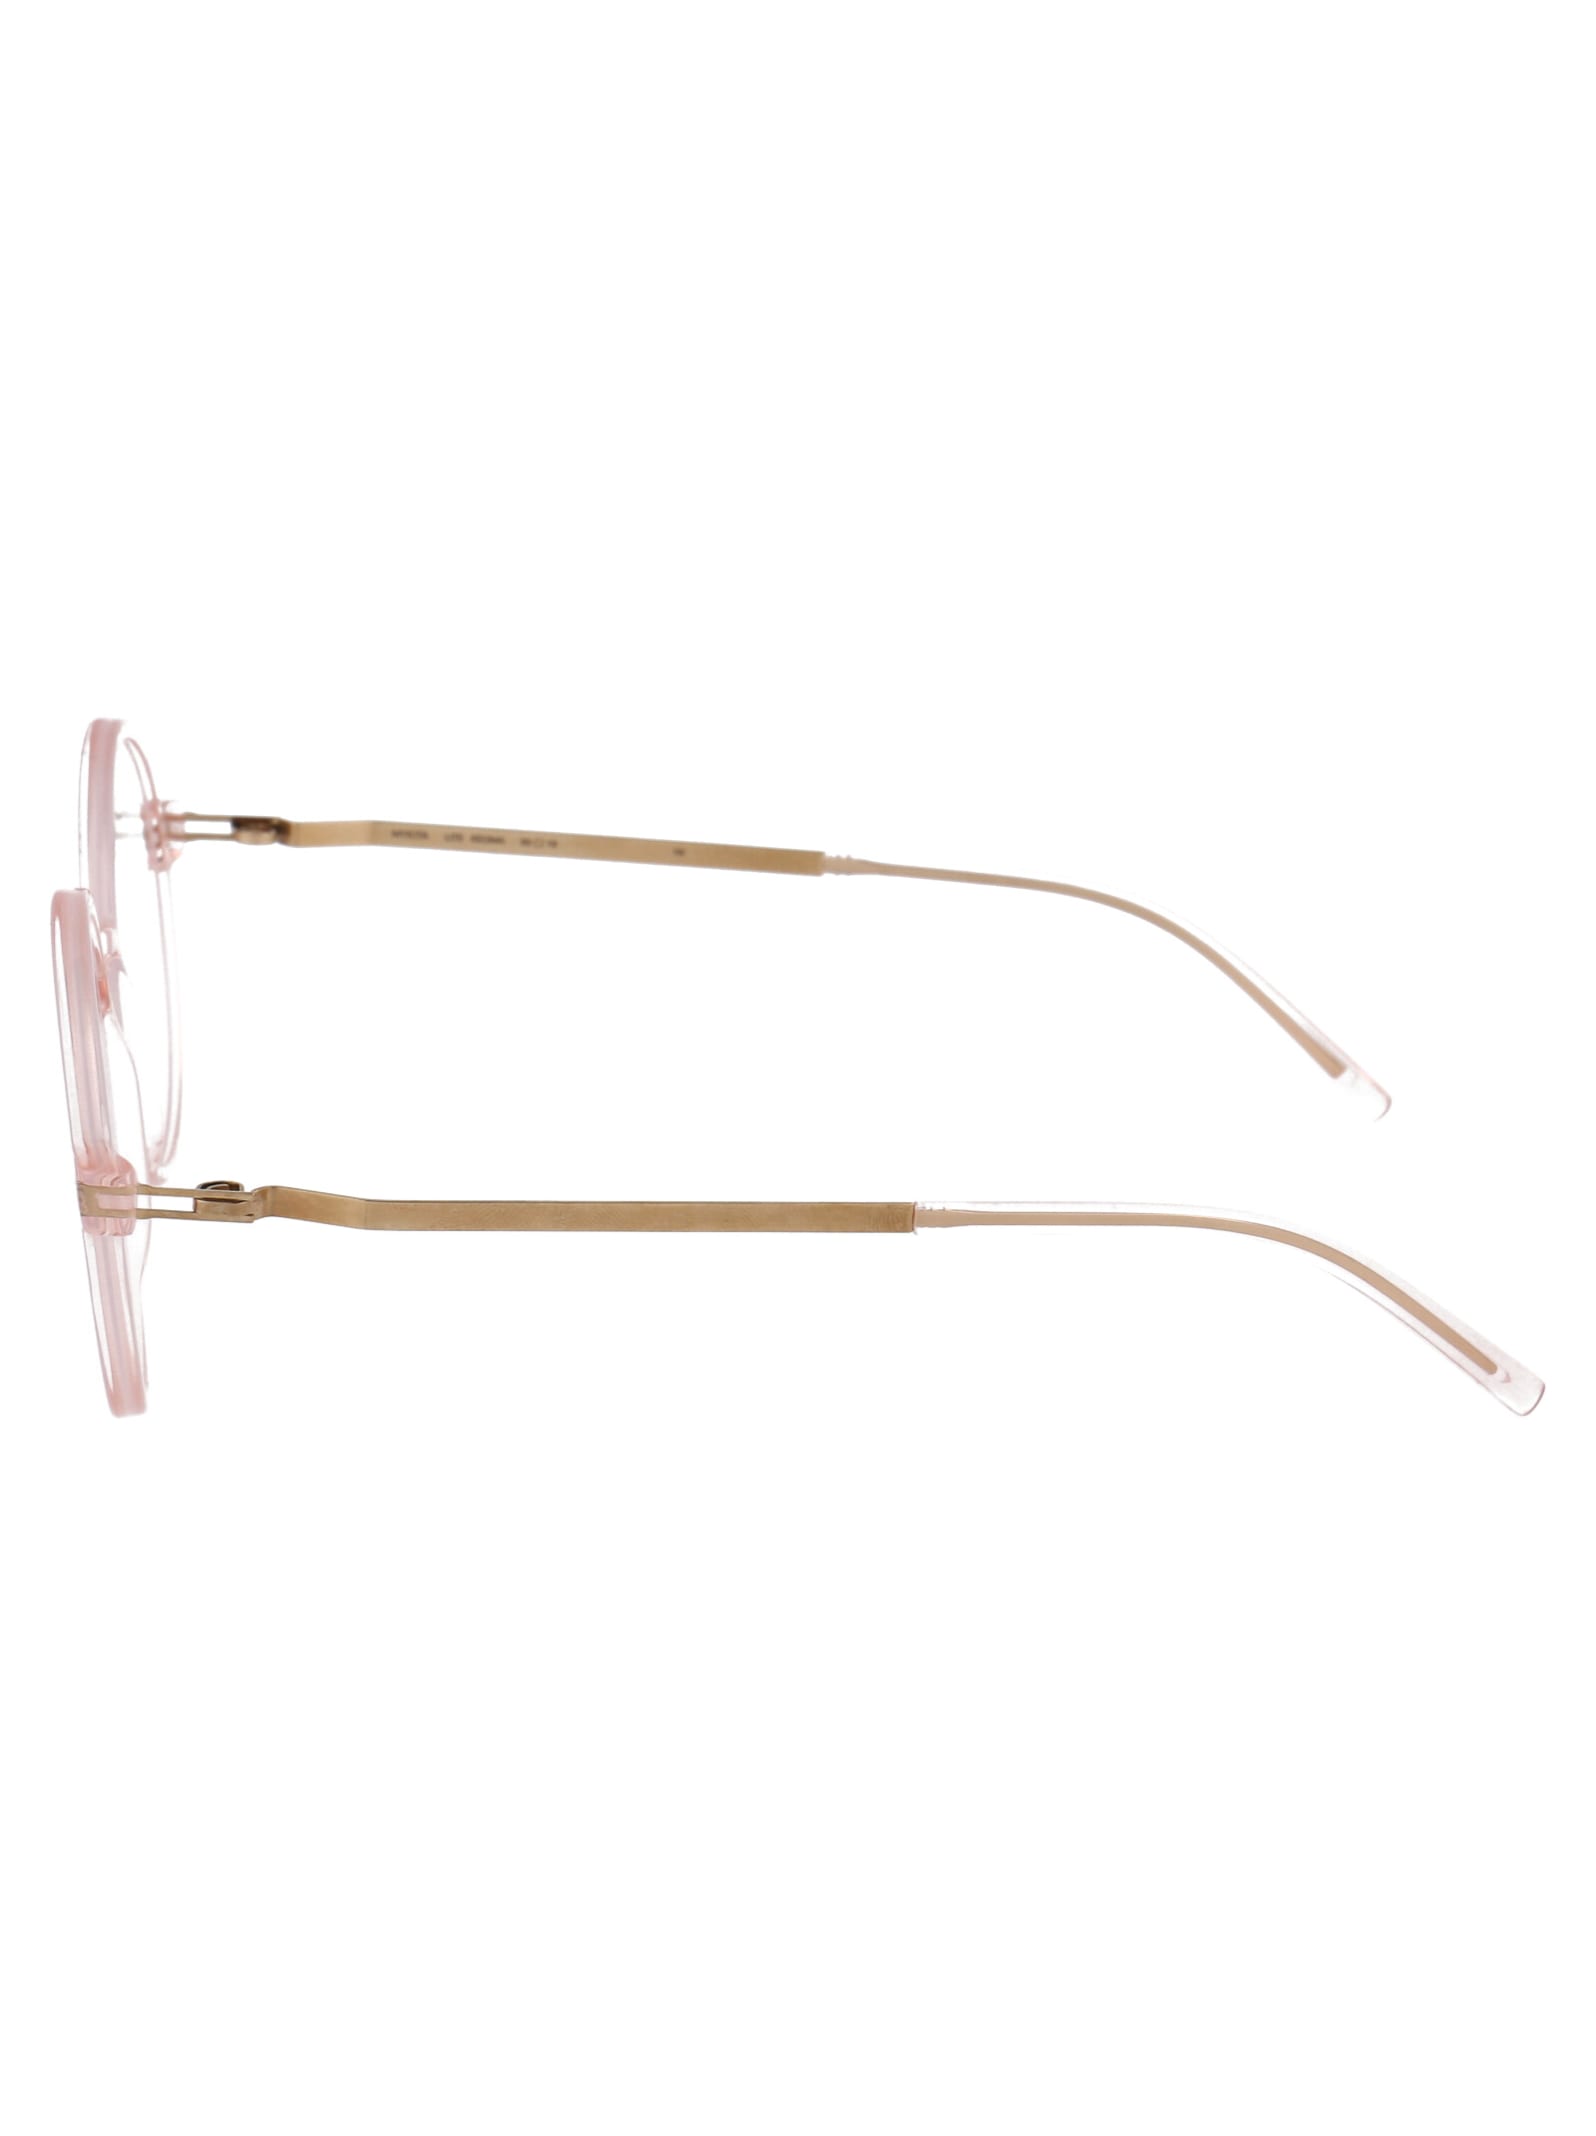 Shop Mykita Keoma Glasses In 940 C20-rose Water/champagne Gold Clear